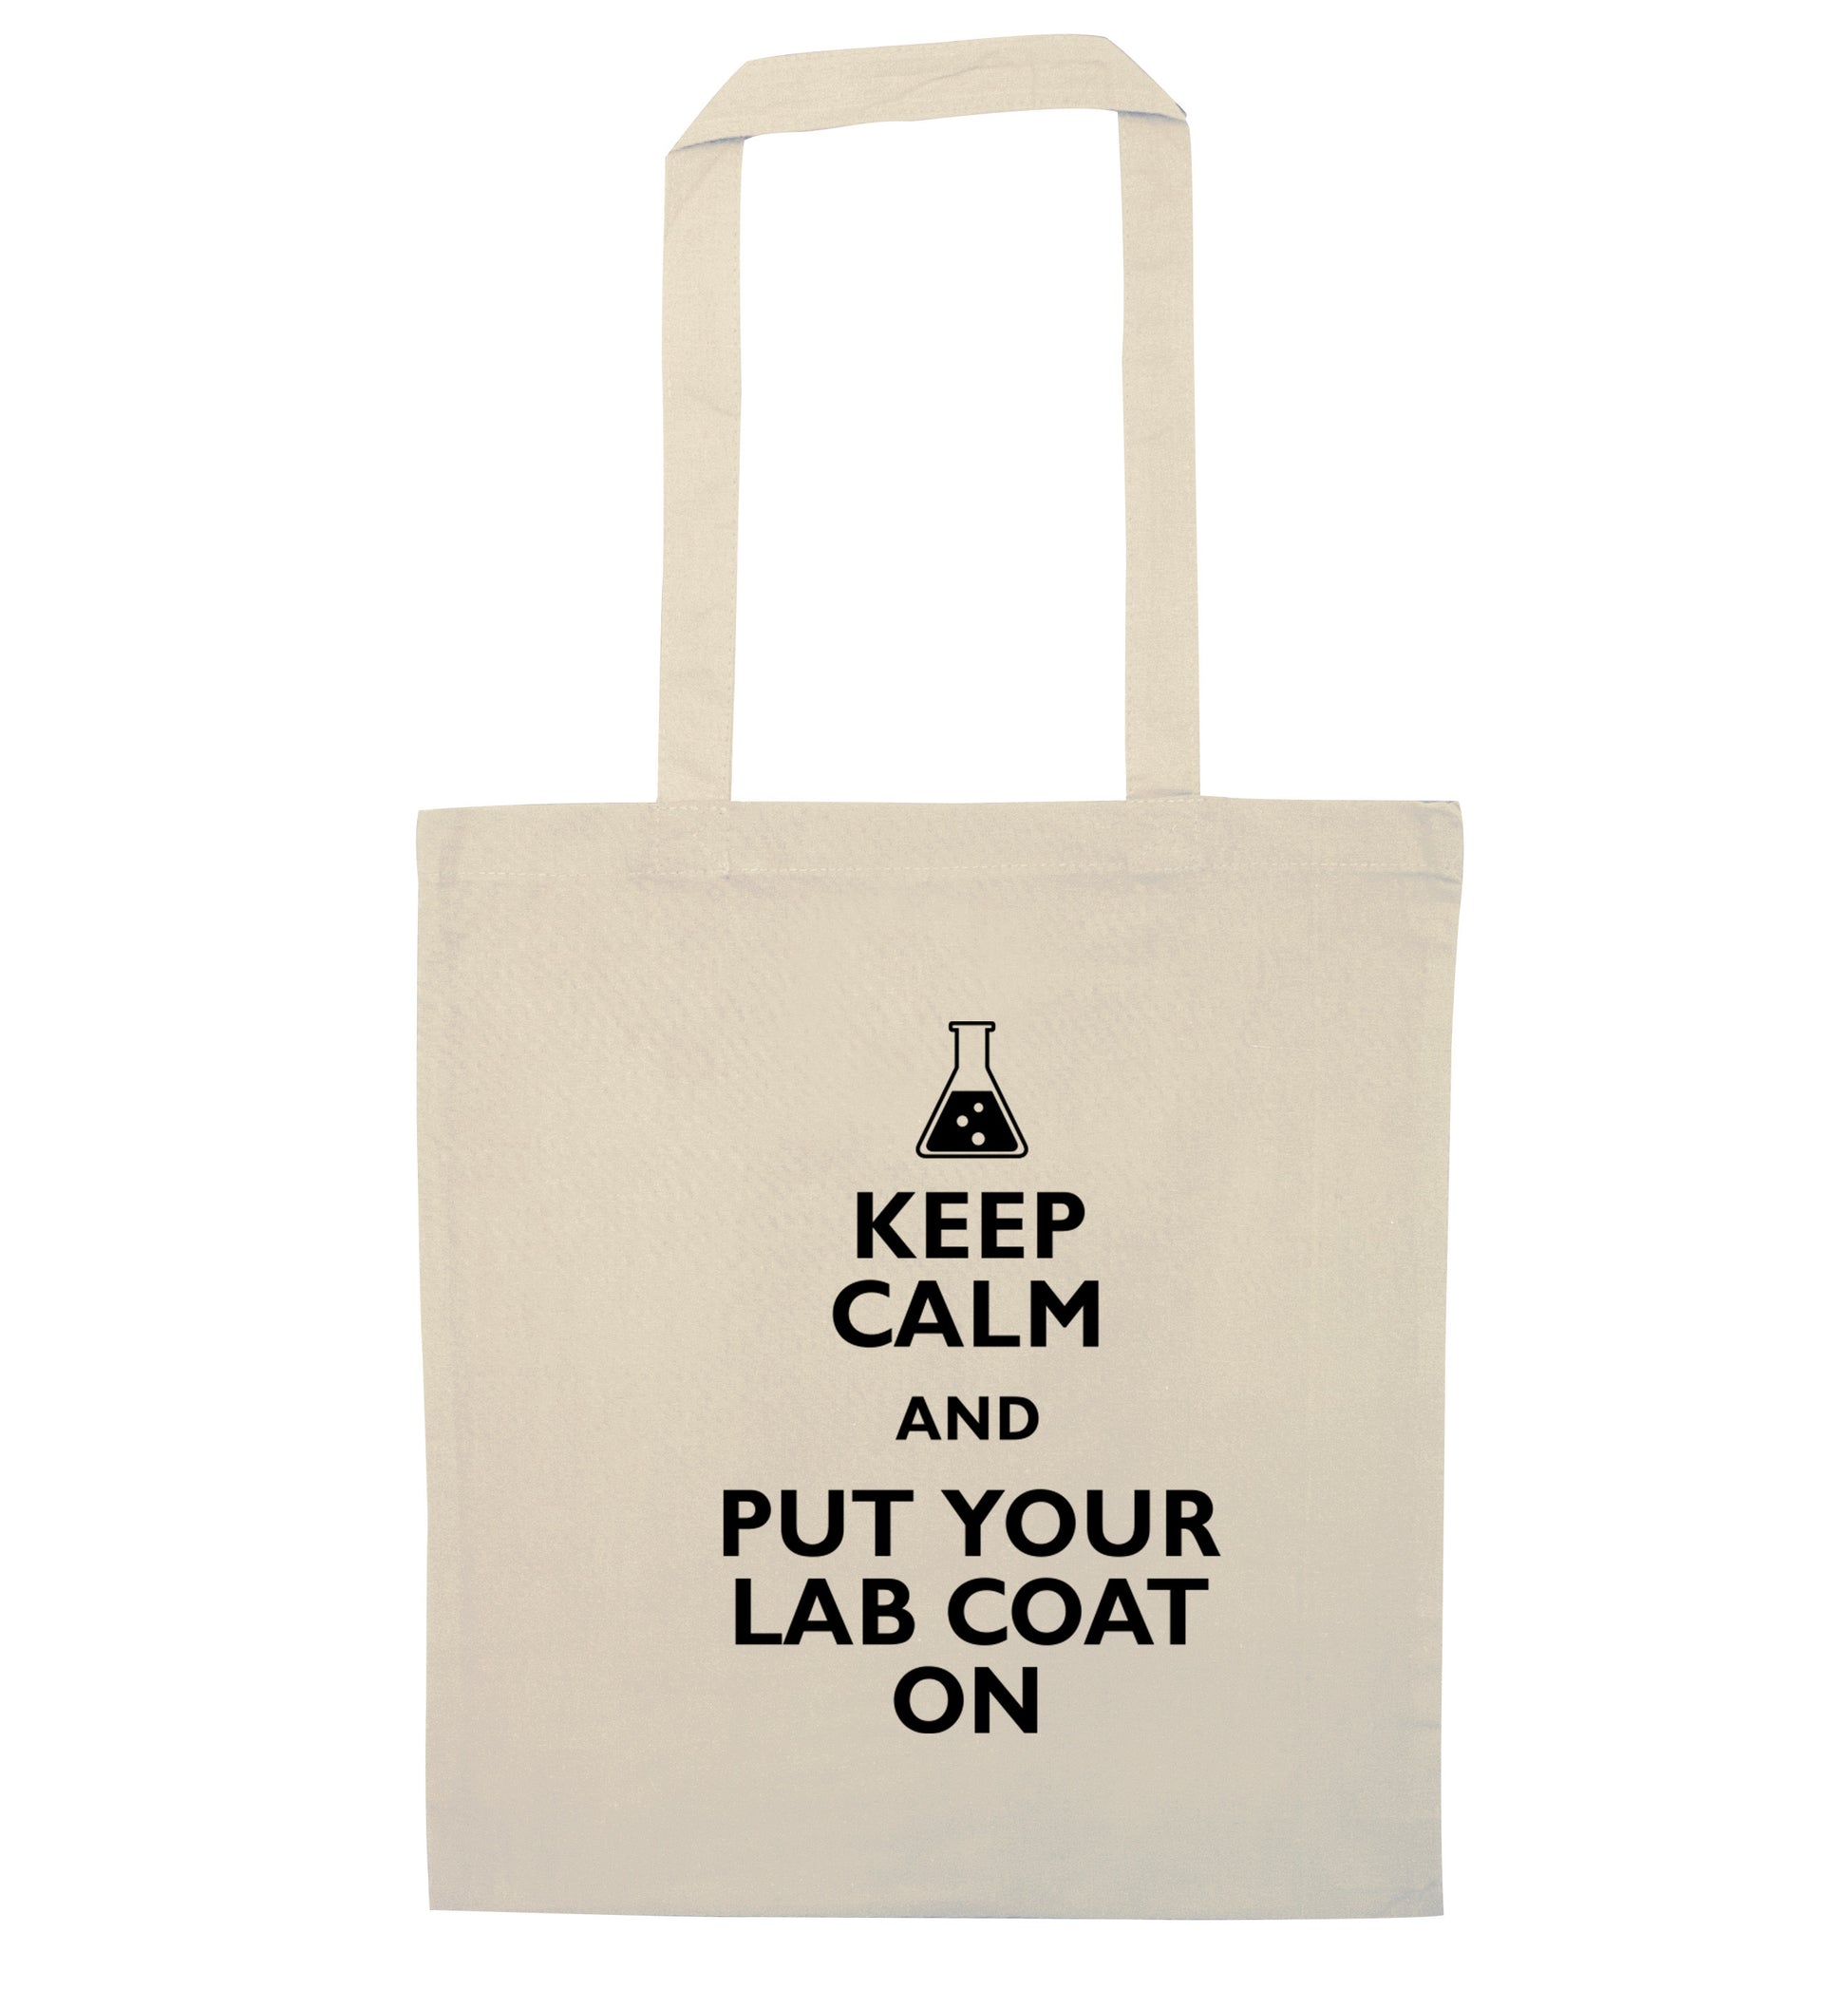 Keep calm and put your lab coat on natural tote bag